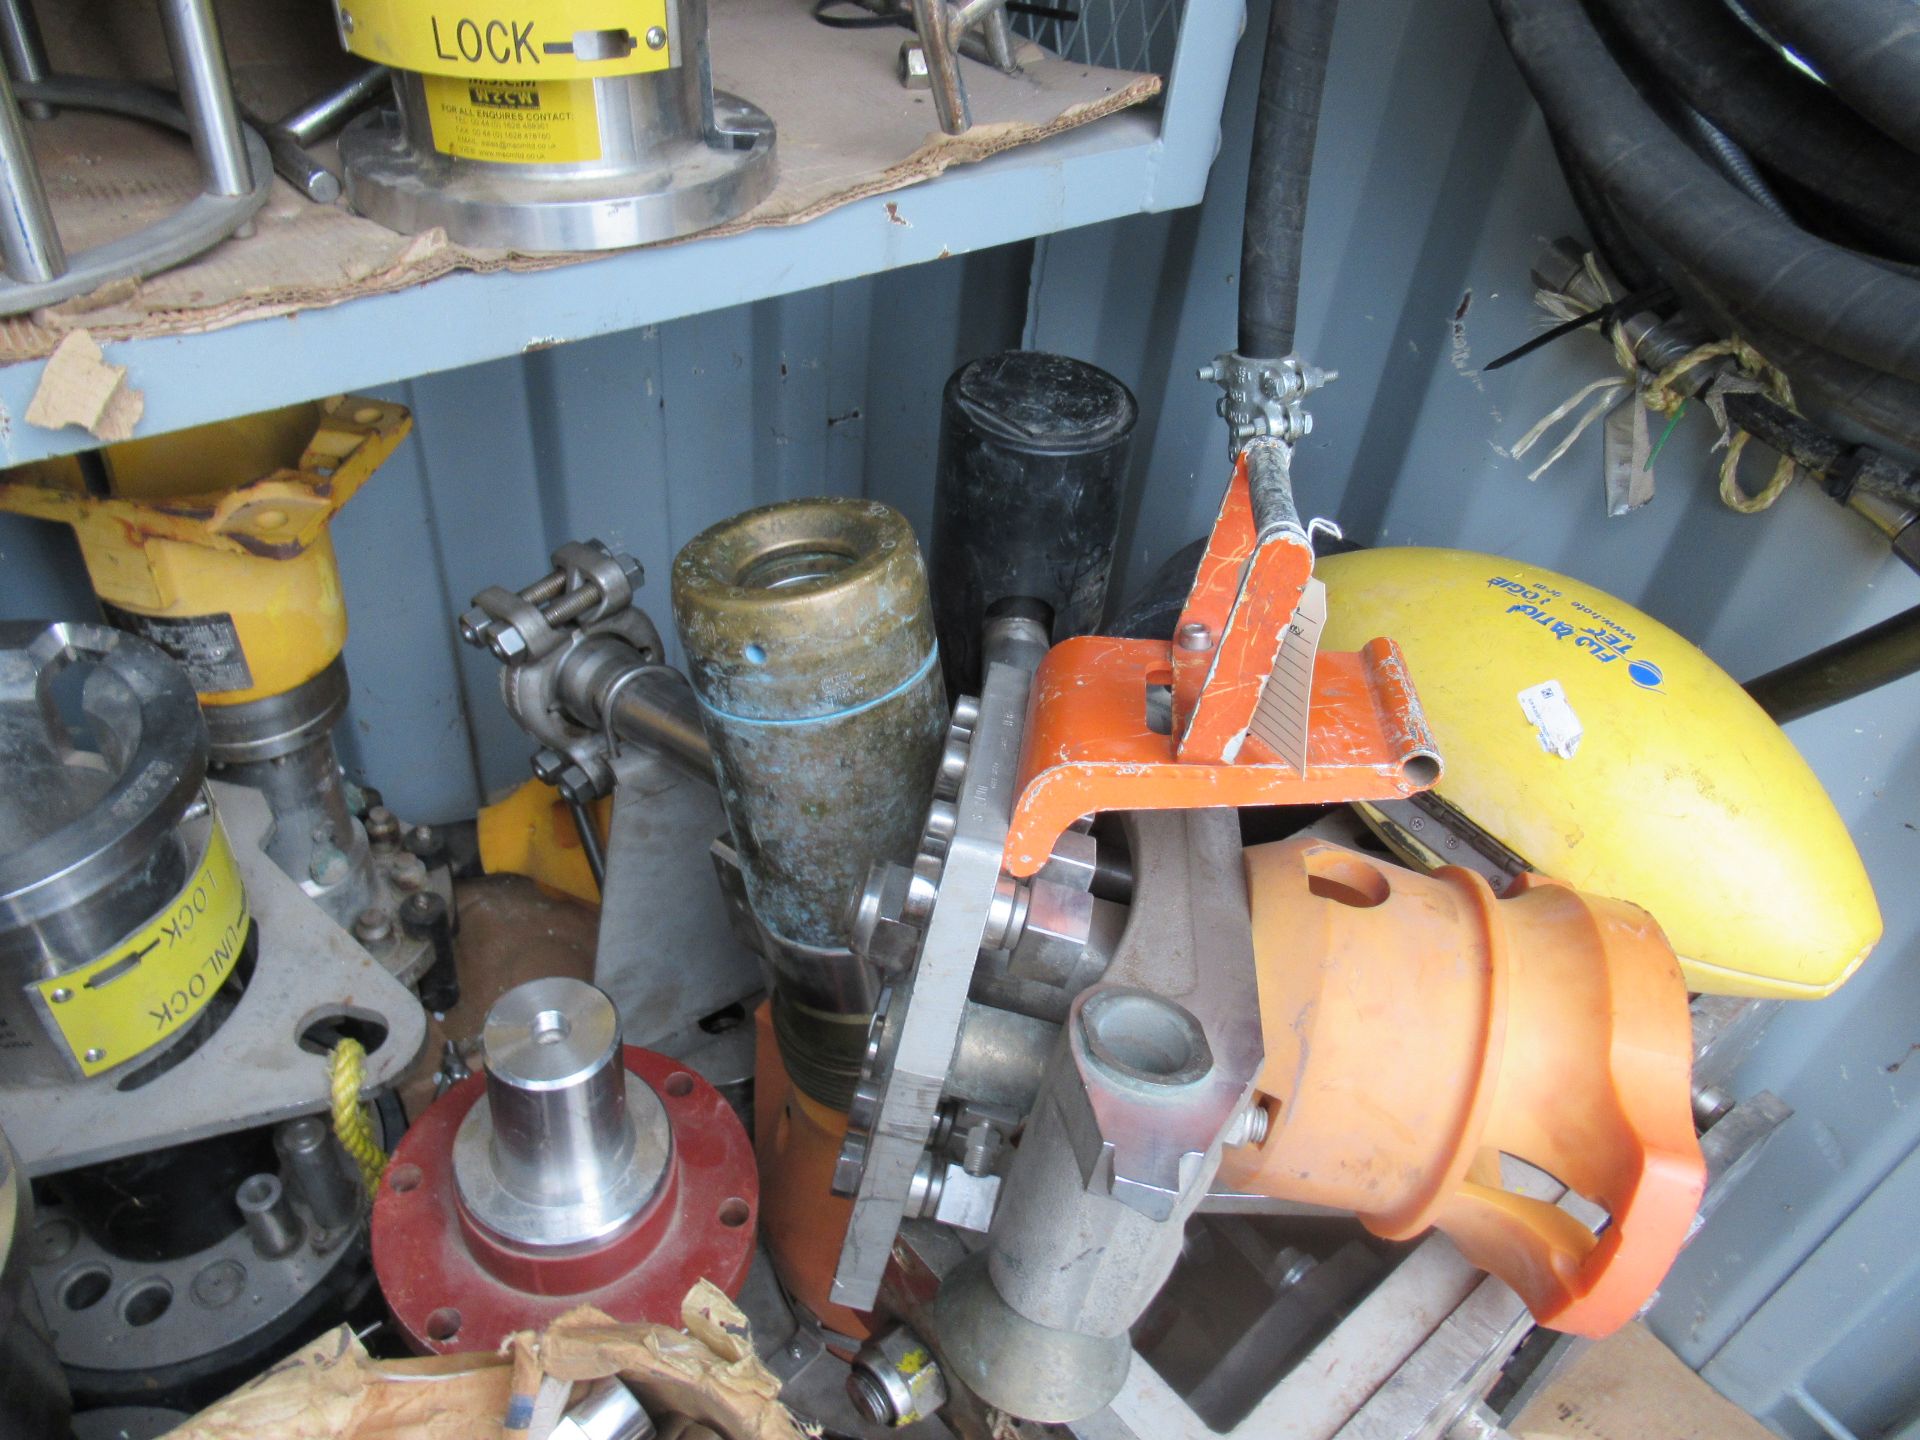 LOT CONSISTING OF 8’ X 4’ SEA CONTAINER AND CONTENTS, including subsea connectors and umbilical - Image 13 of 14